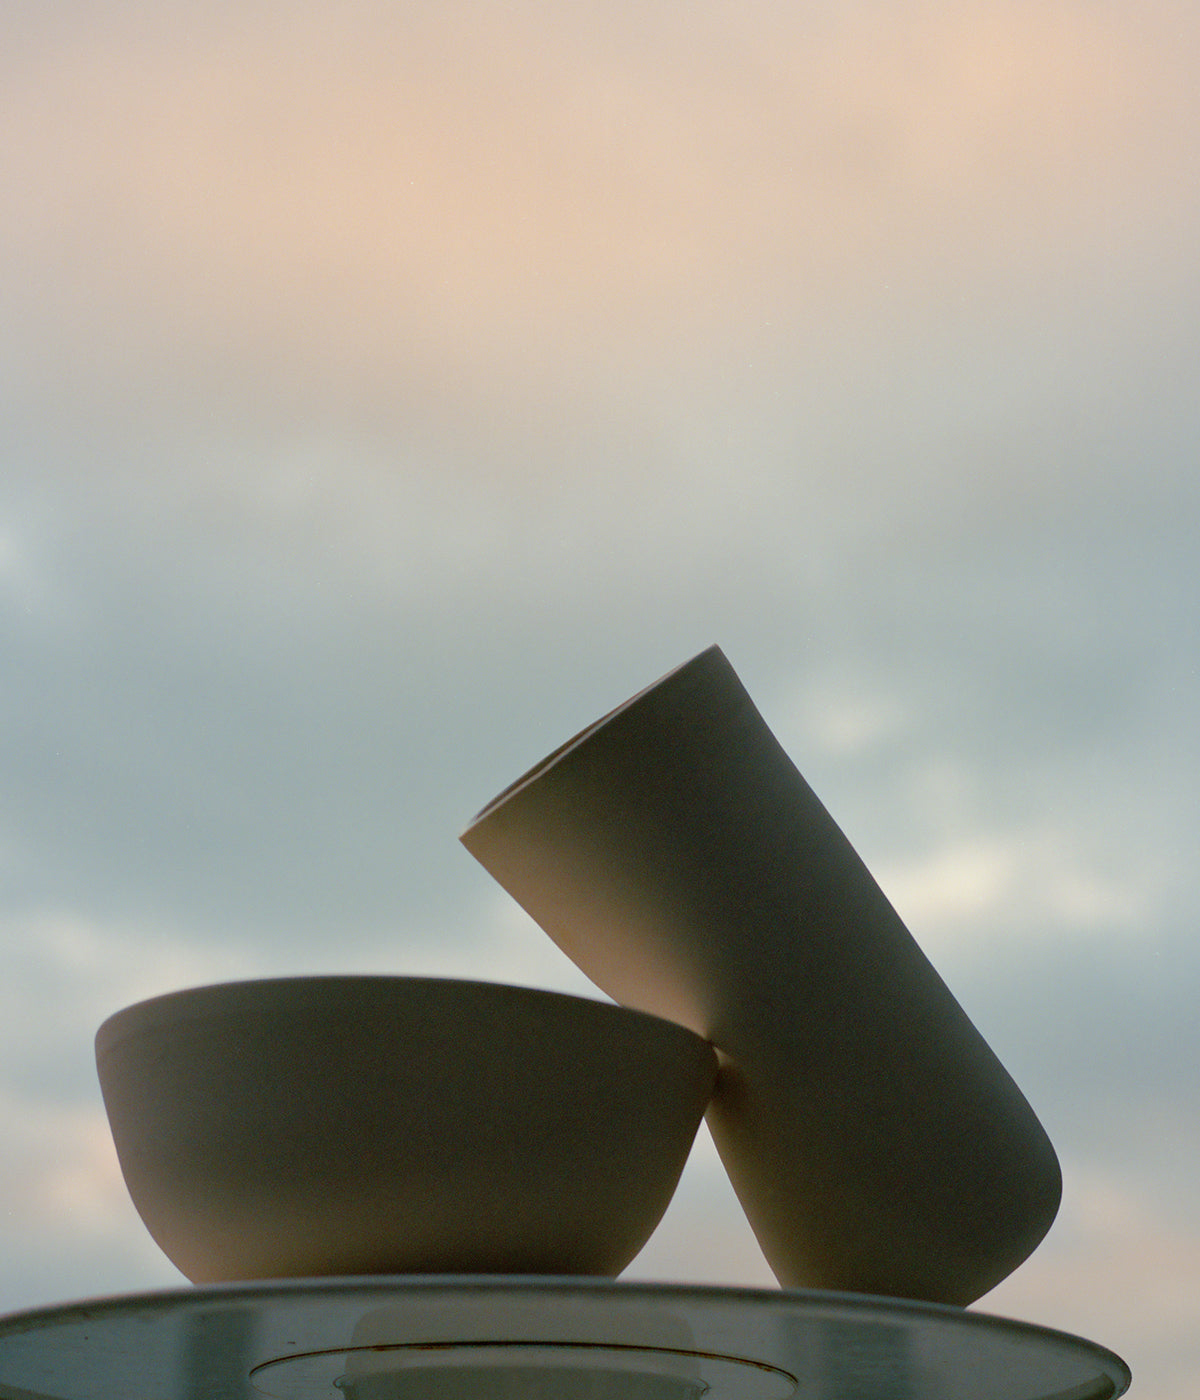  white porcelain hand-thrown ceramics on table against summer evening sky with soft clouds and orange sunset